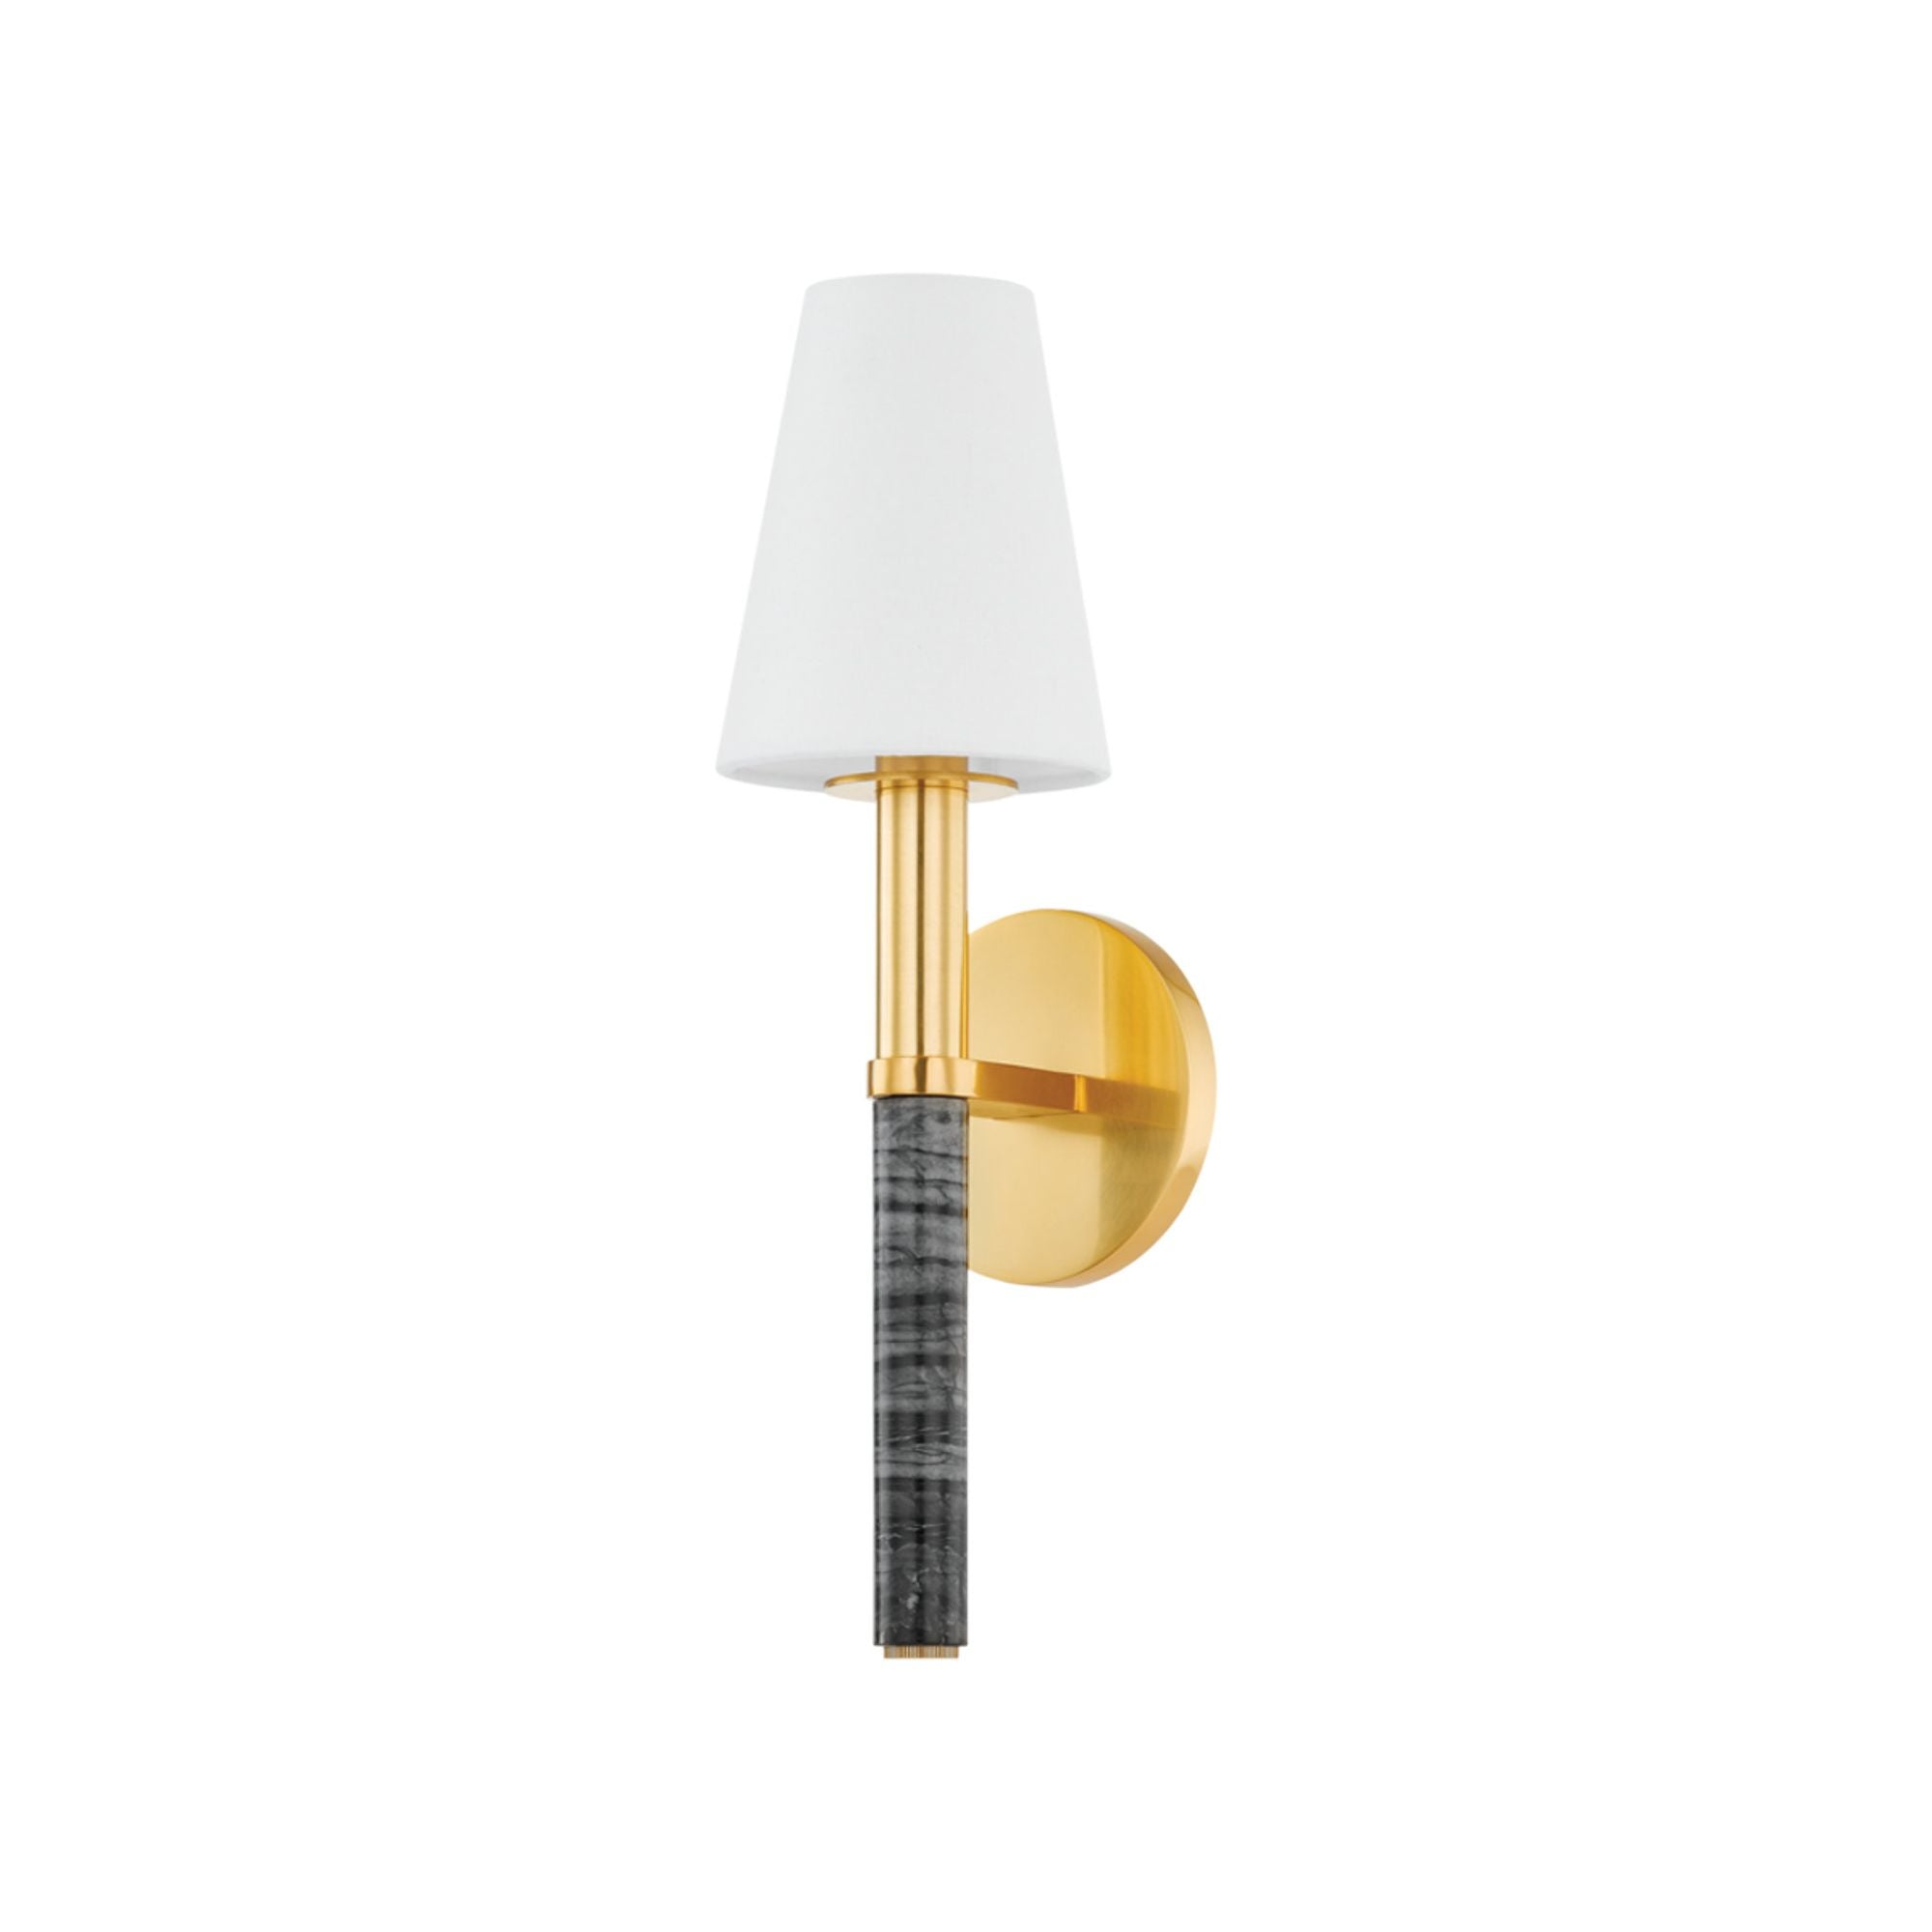 Montreal 1 Light Wall Sconce in Aged Brass